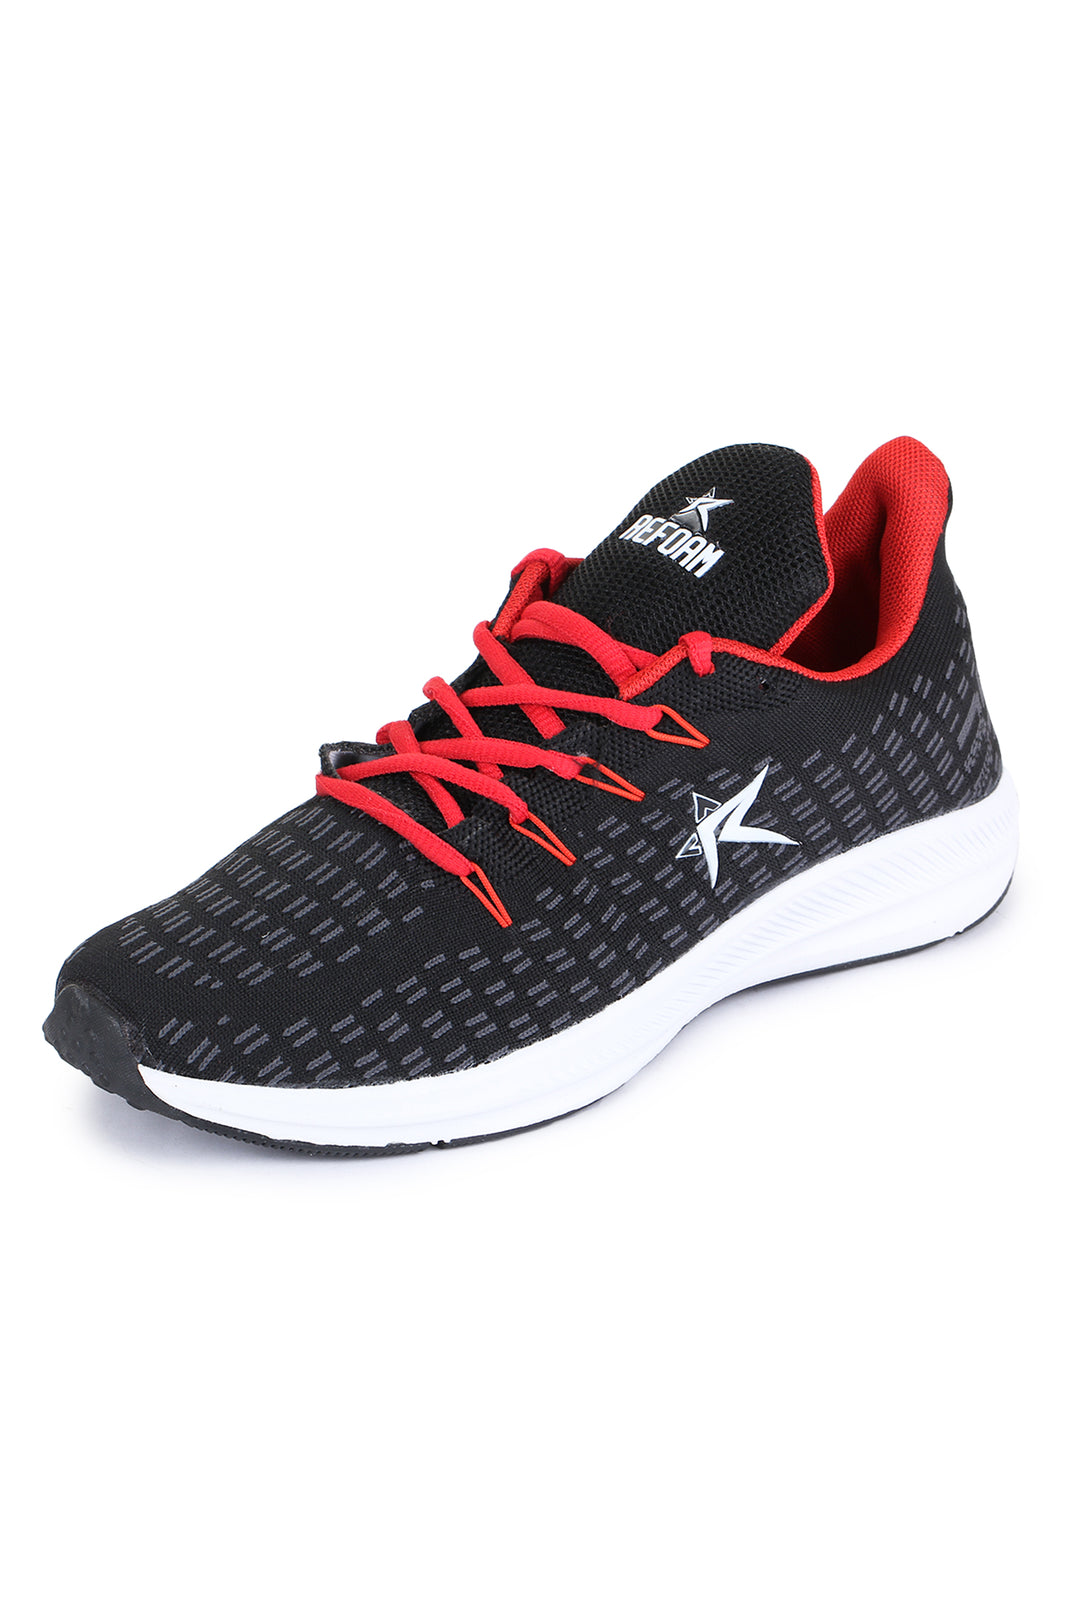 Red Solid Mesh Lace Up Running Sport Shoes For Men